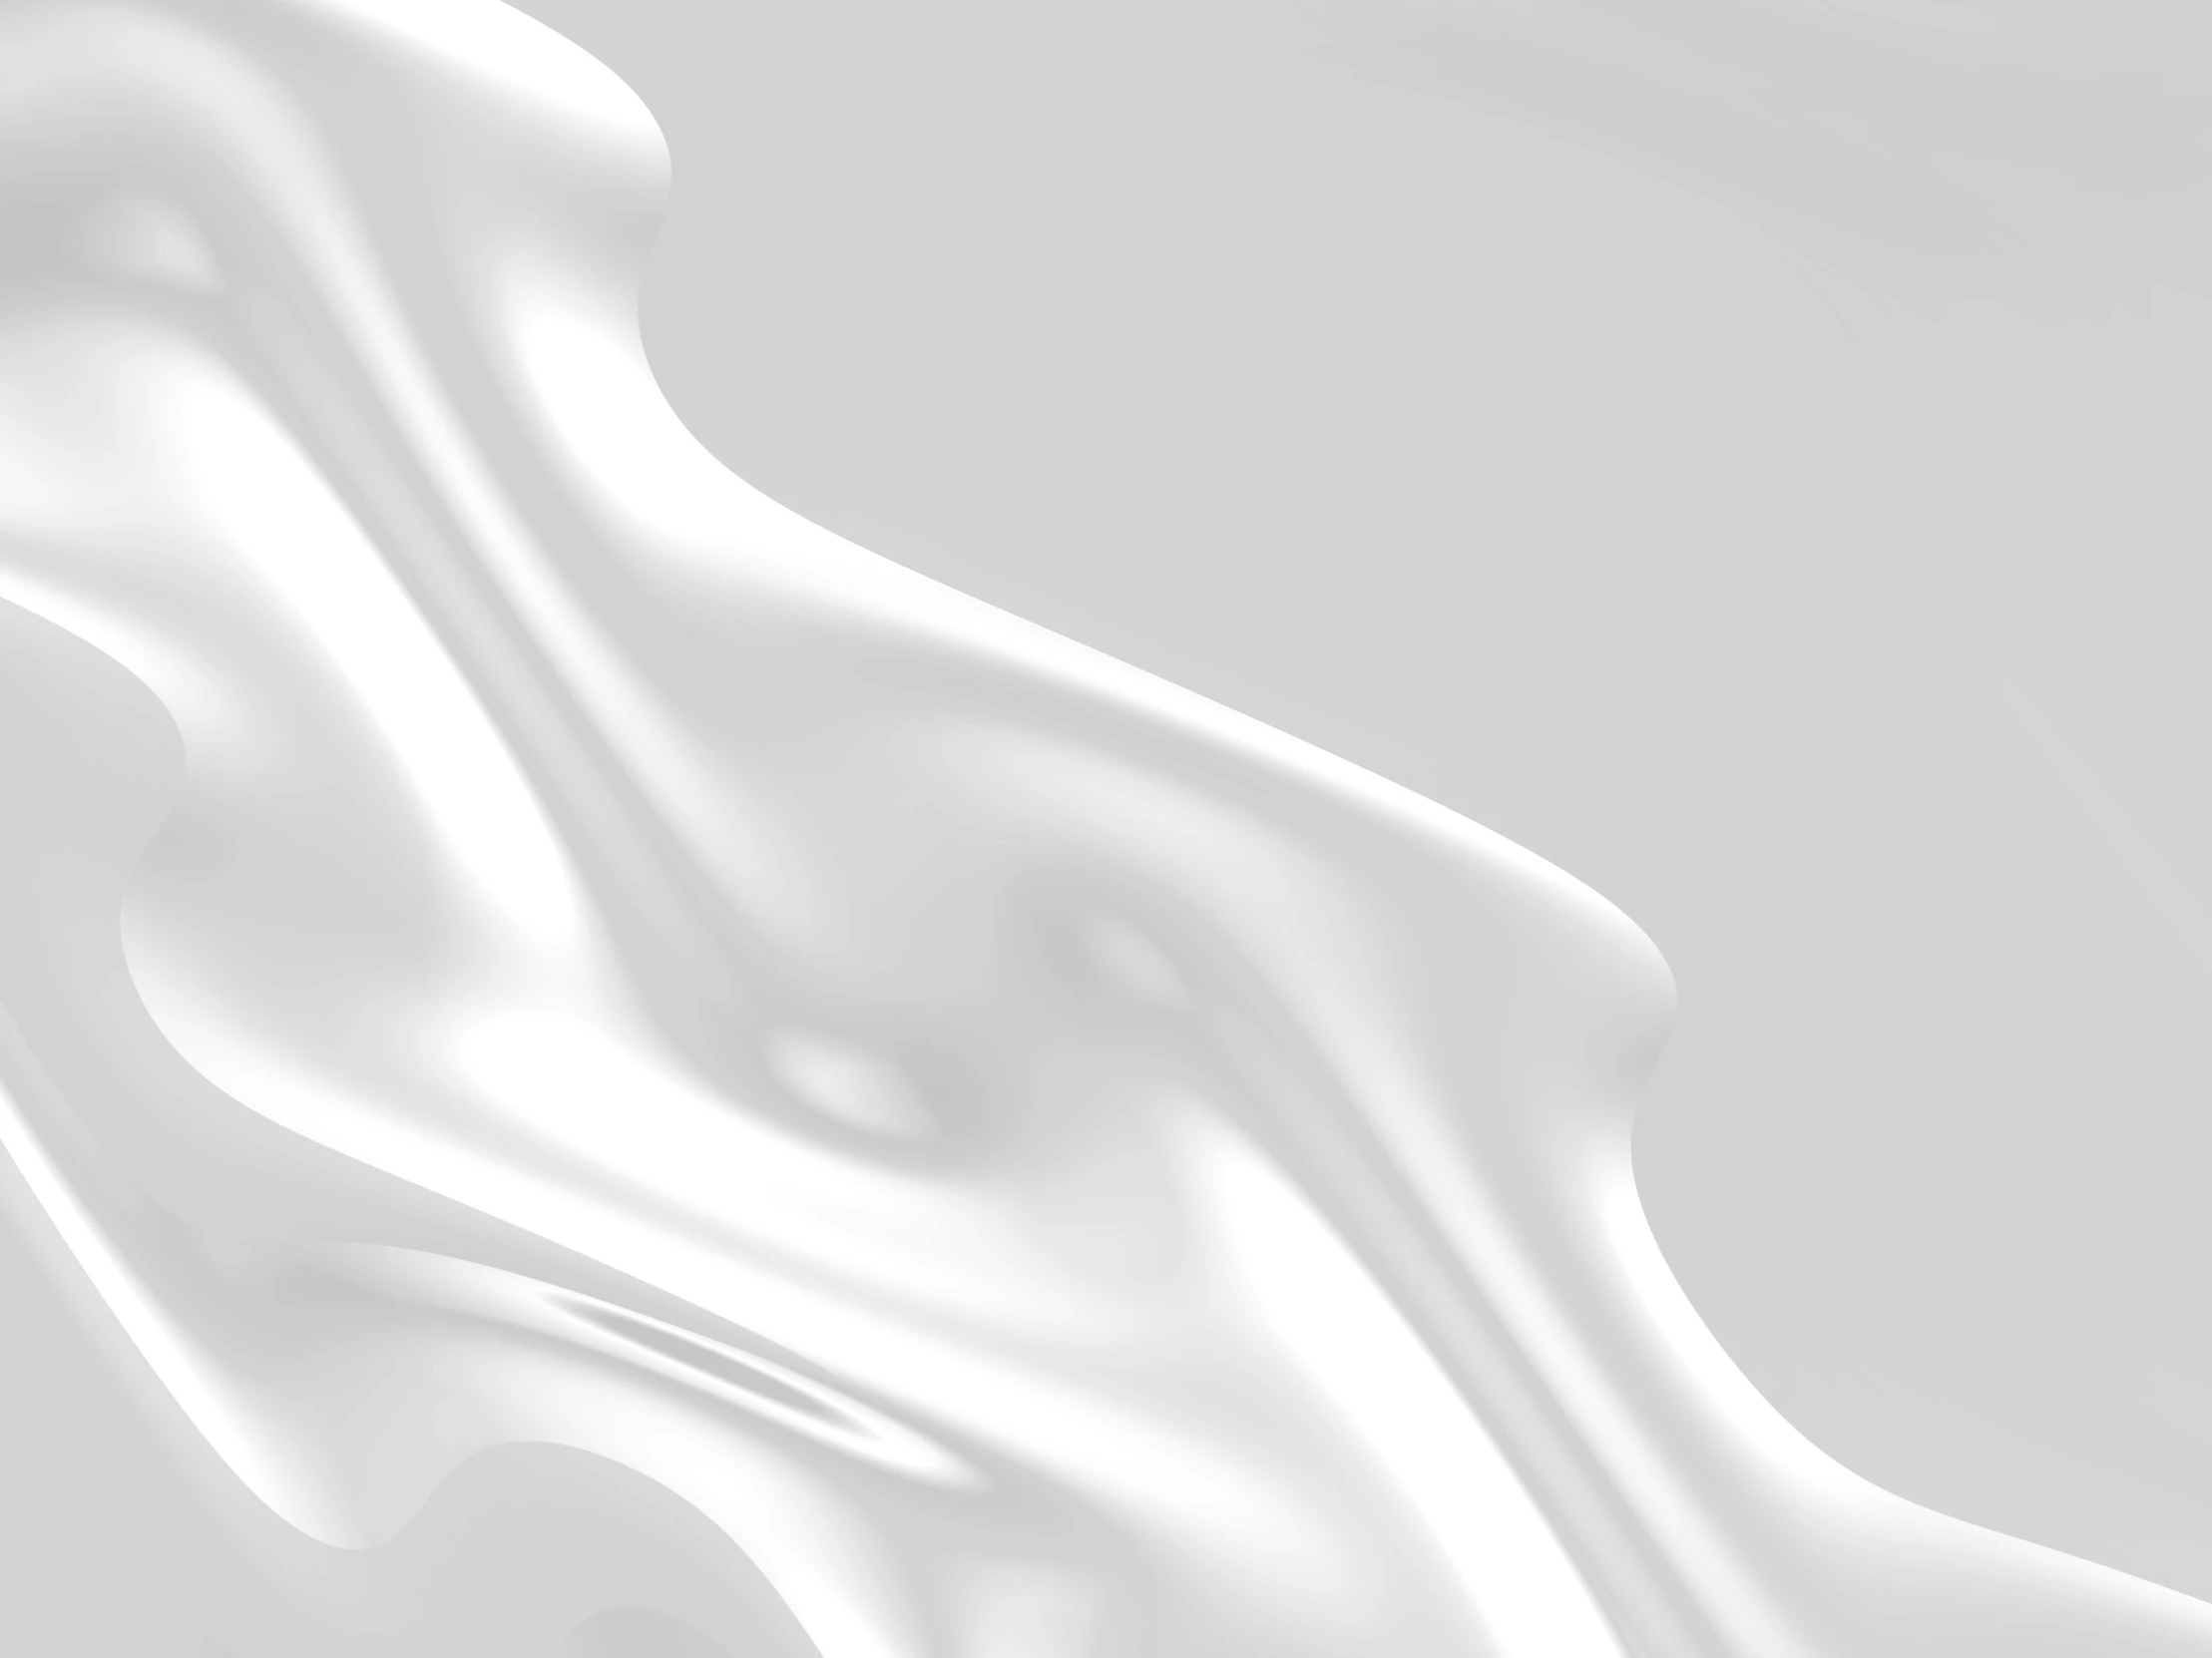 white paint on a gray background with black and white swirls